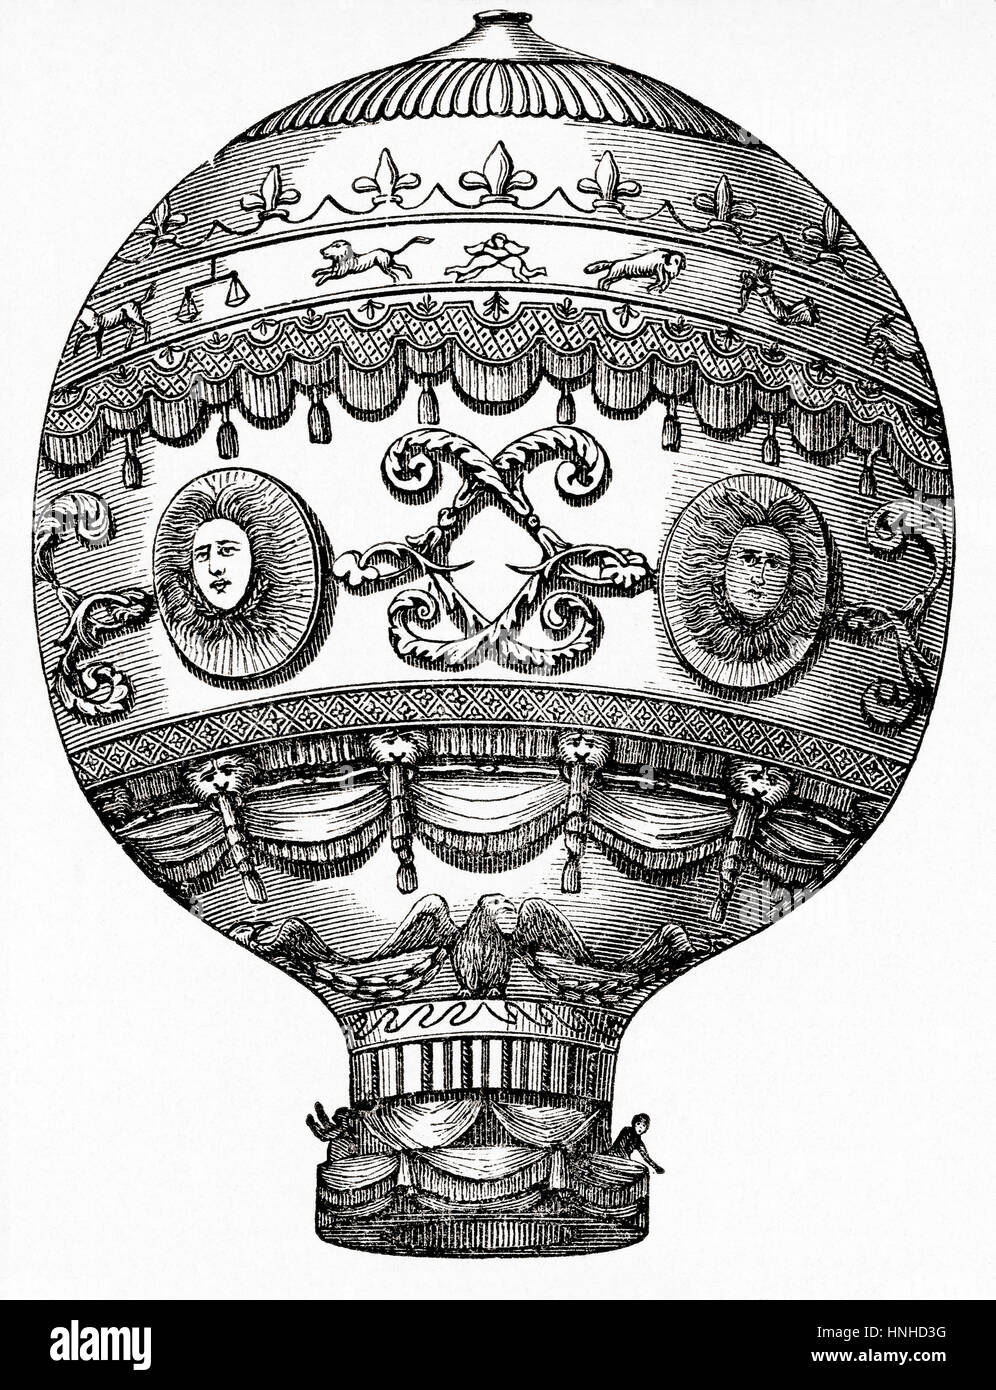 The Montgolfier brother's hot air balloon, Aérostat Réveillon, launched in the first piloted ascent at Versailles, France in 1783.   From Meyers Lexicon, published 1927. Stock Photo